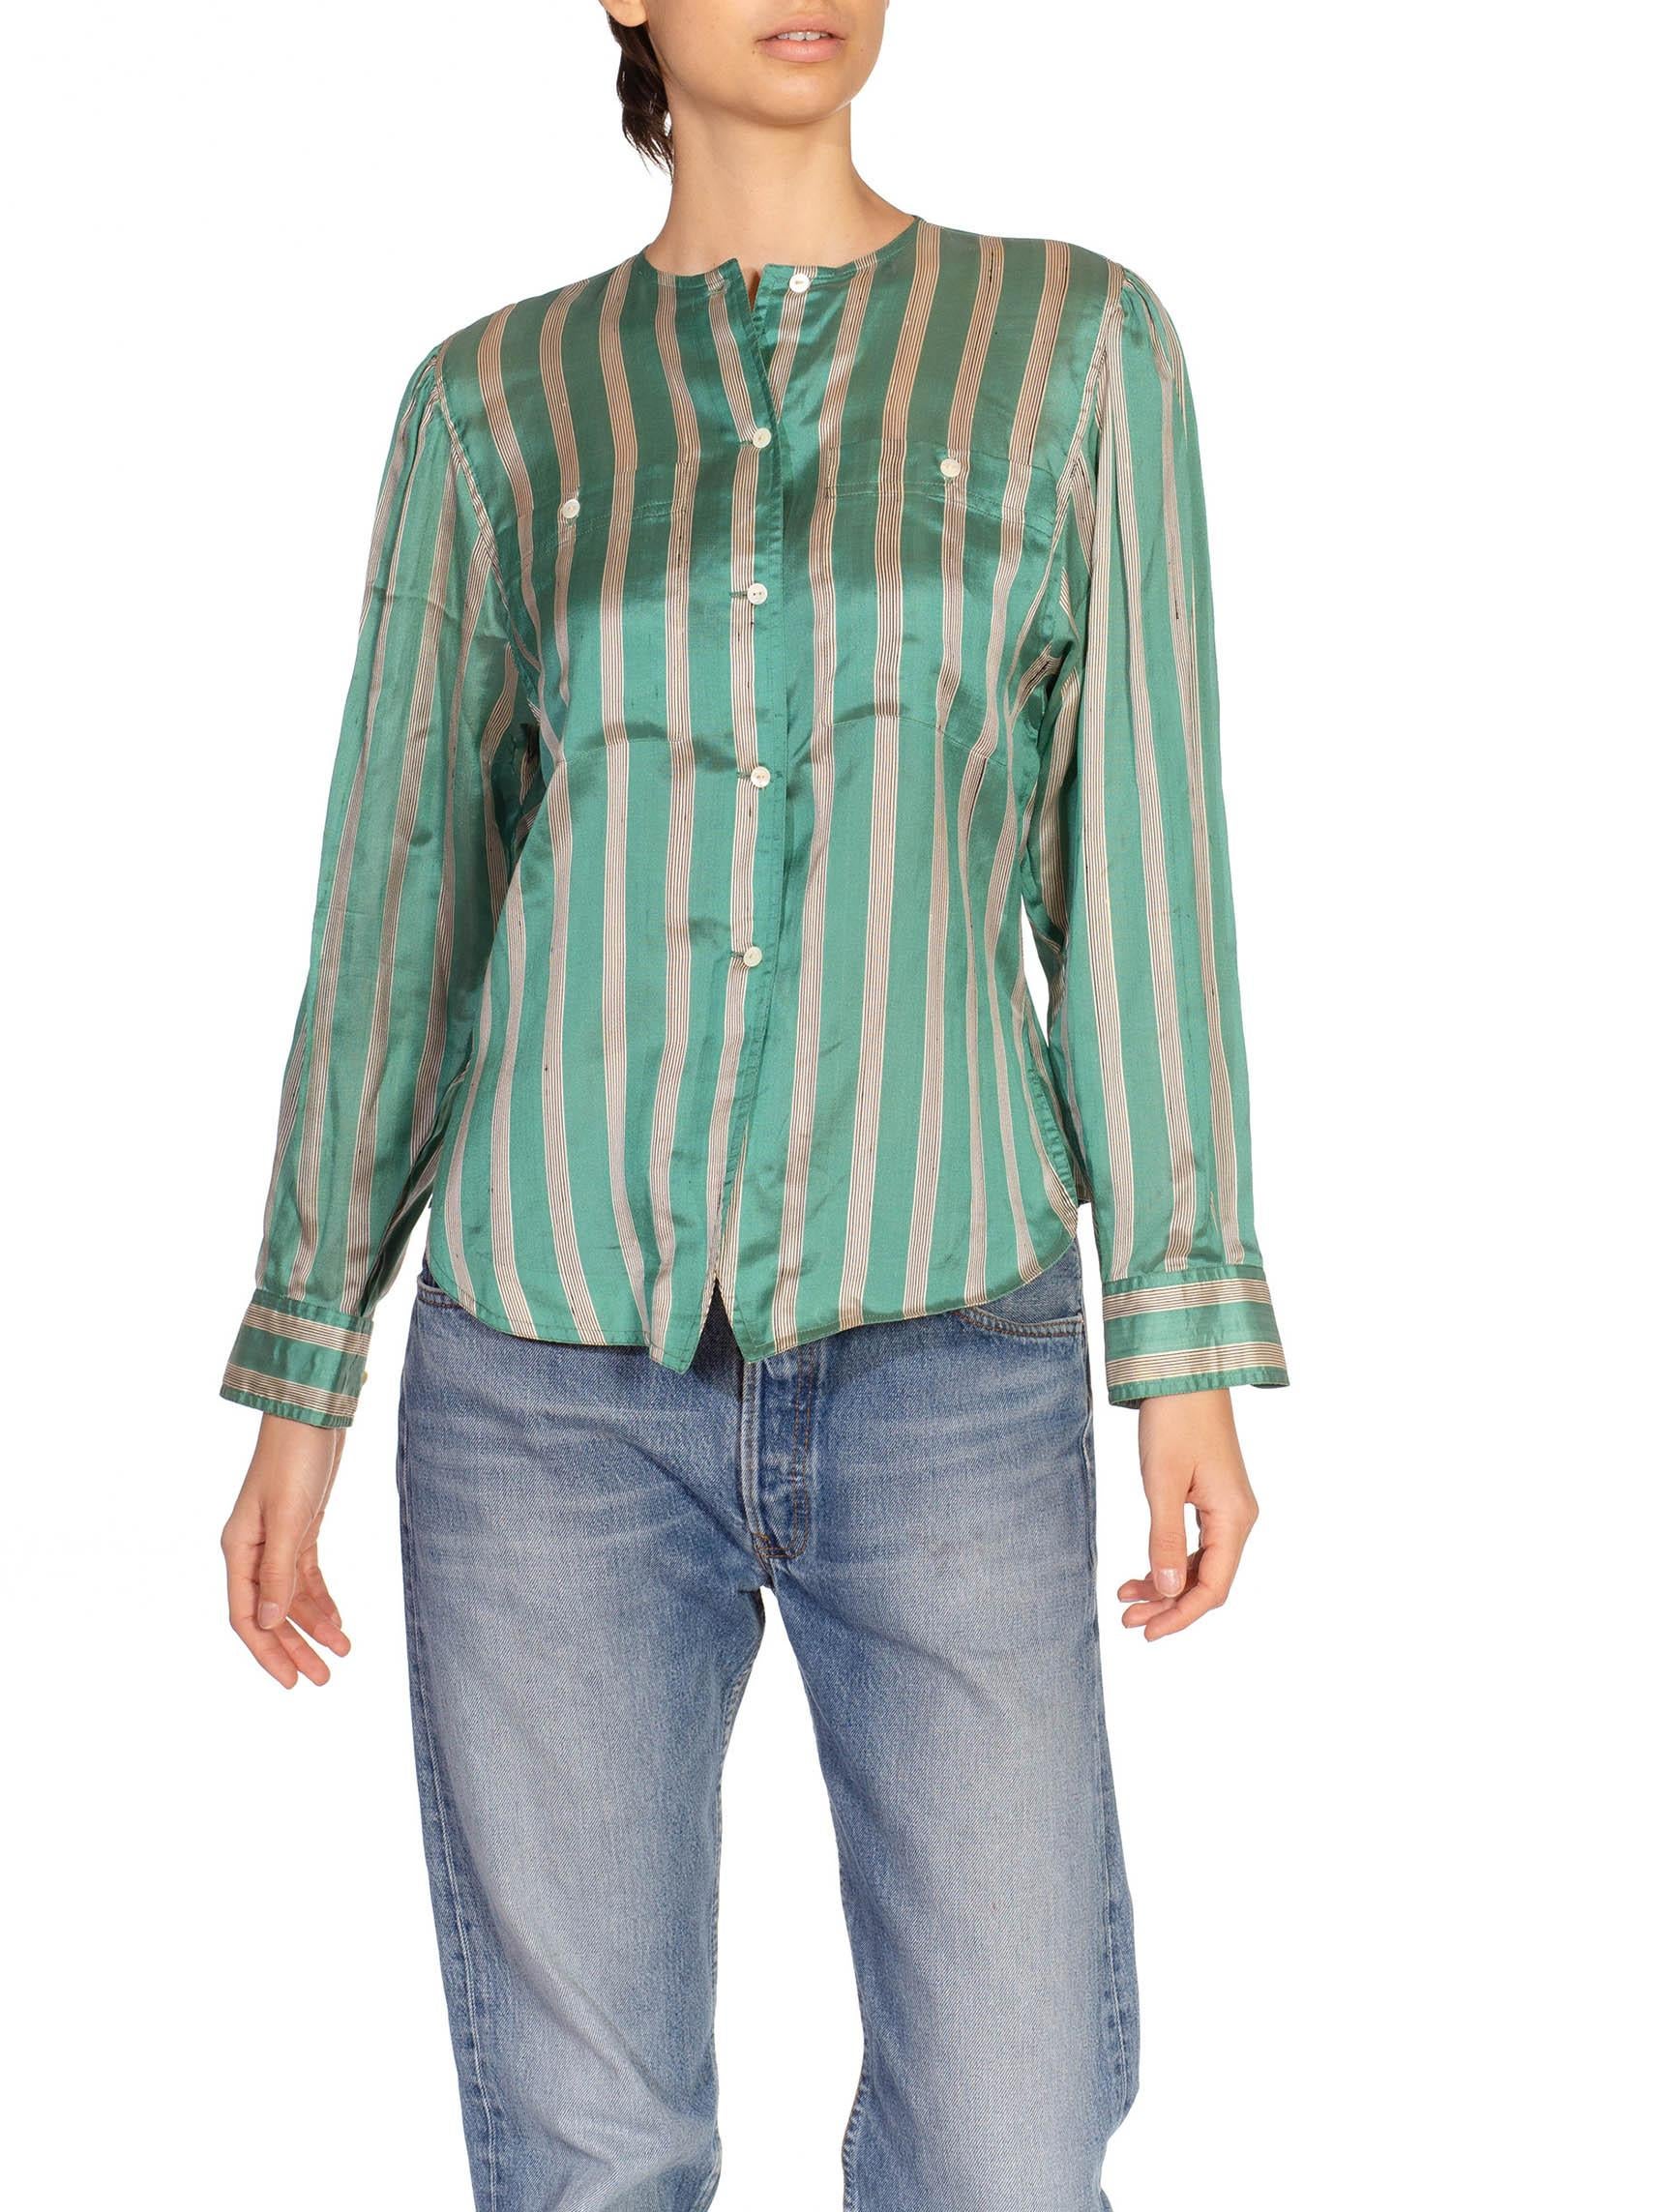 1980S Gucci Teal & Cream Silk Stripped Button Down Blouse In Excellent Condition For Sale In New York, NY